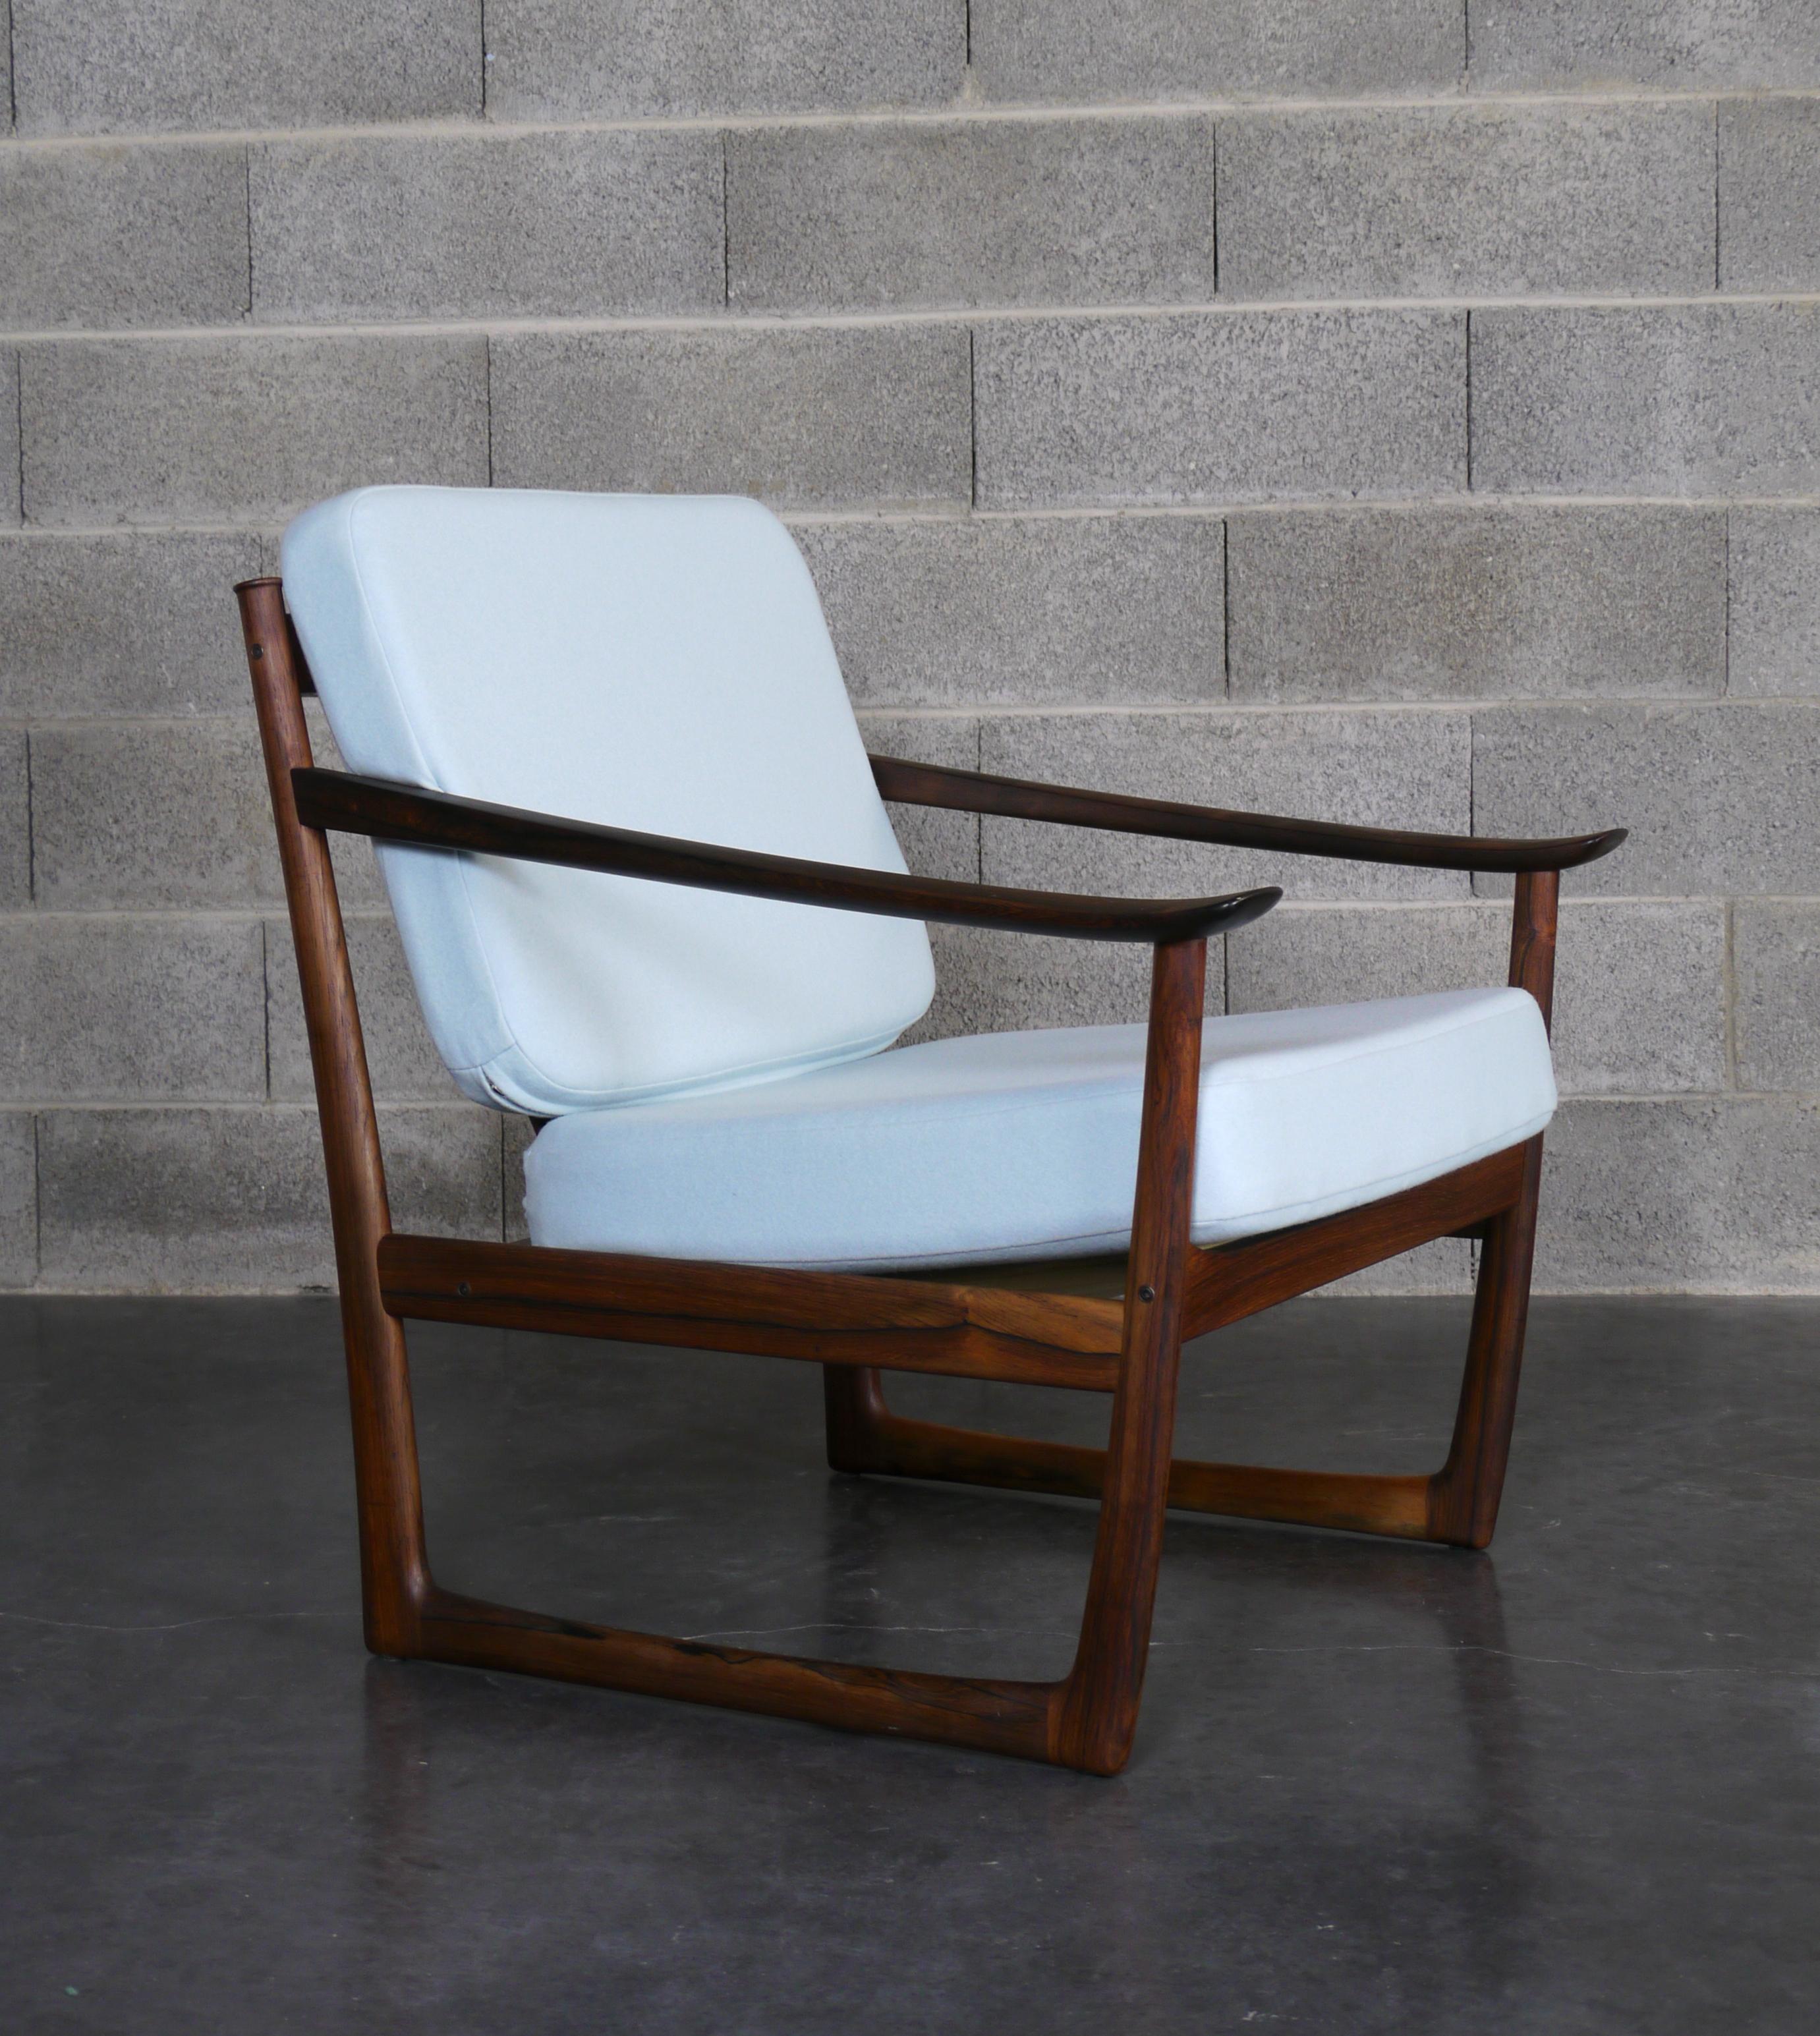 MidCentury easy chair model FD 130 designed by the Danish architects Peter Hvidt & Orla Mølgaard Nielsen. It was produced in Denmark by France & Daverkosen during the 1950's. This is a rare piece made of solid rosewood, we have restored it